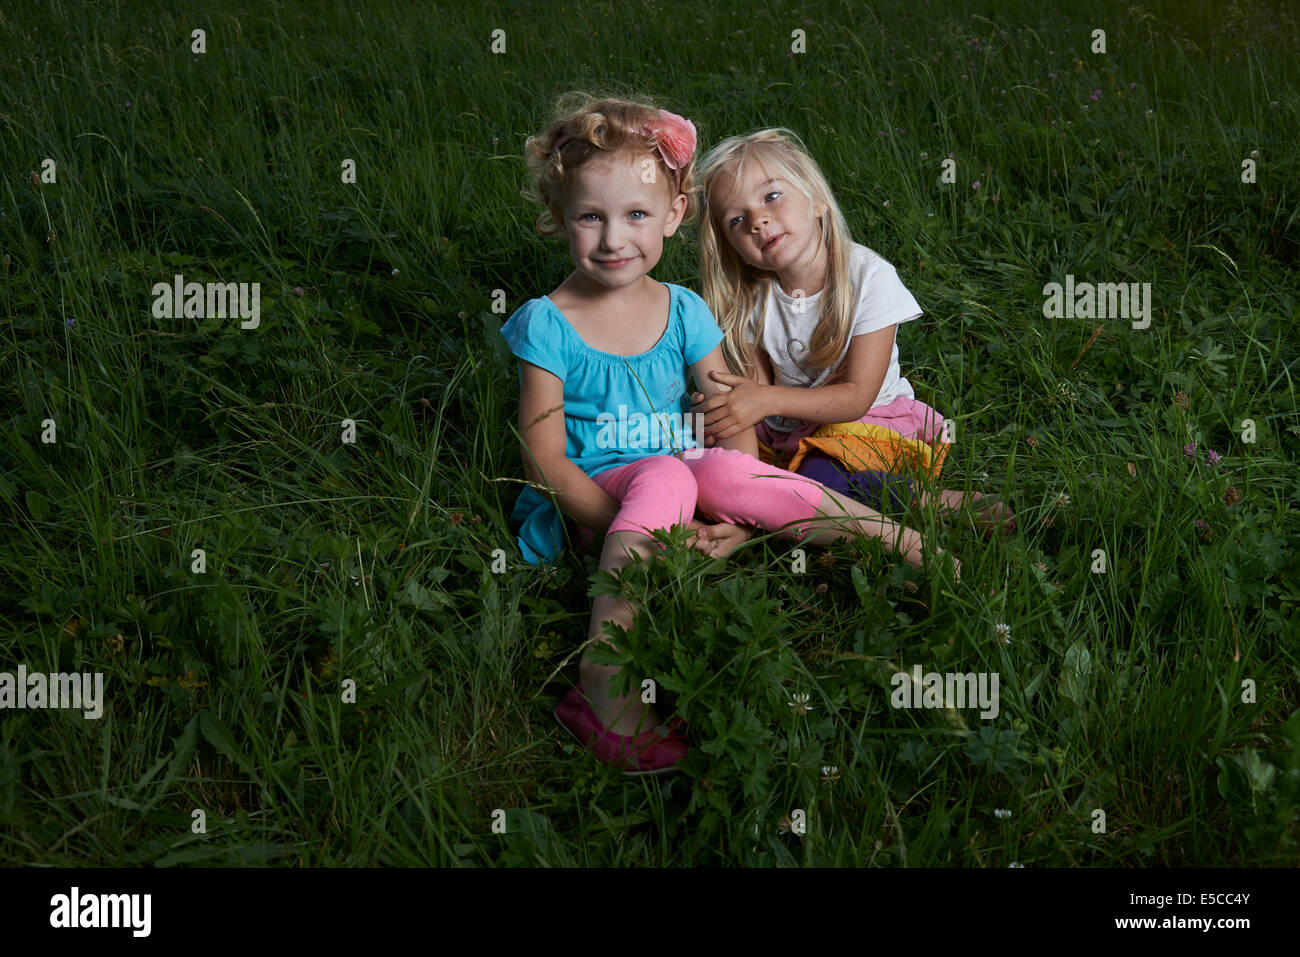 Portrait of children blond two girls sisters sitting in grassy field summertime Stock Photo